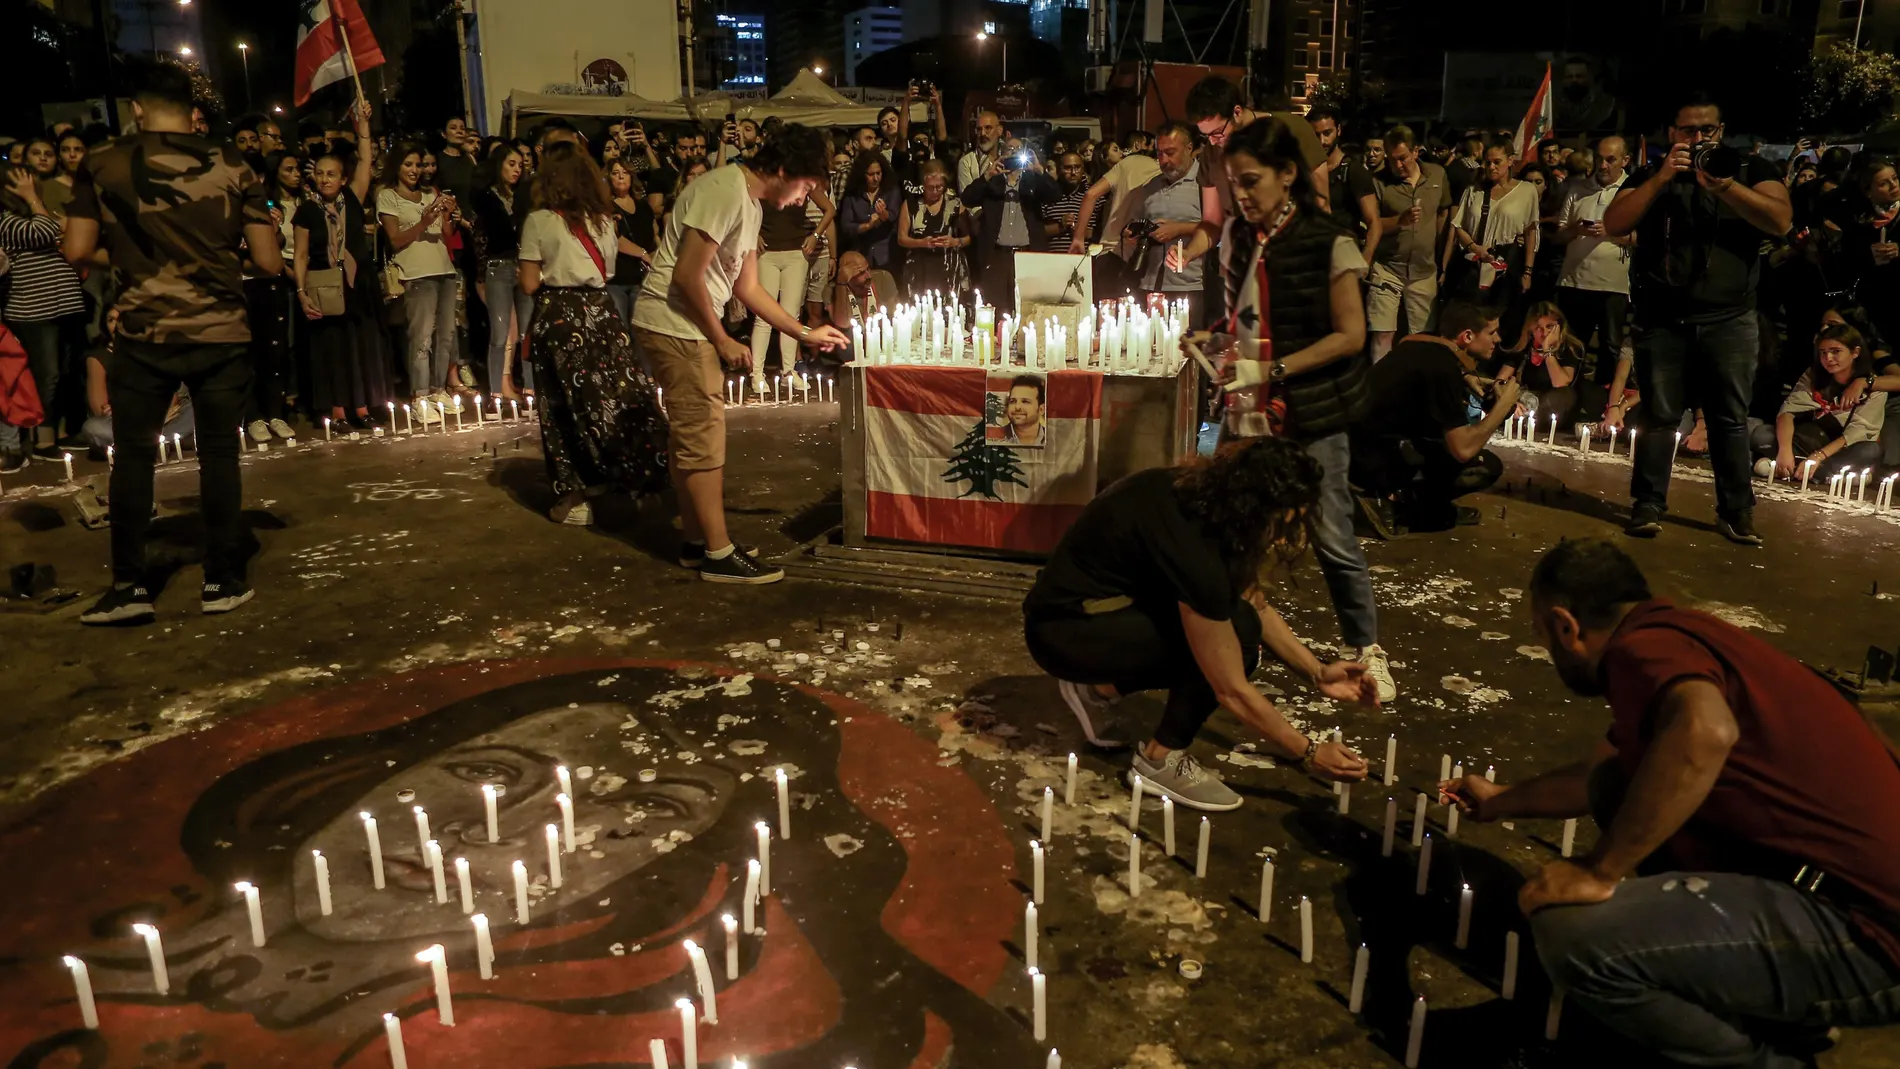 Vigil for killed anti-government activist Alaa Abou Fakhr in Beirut